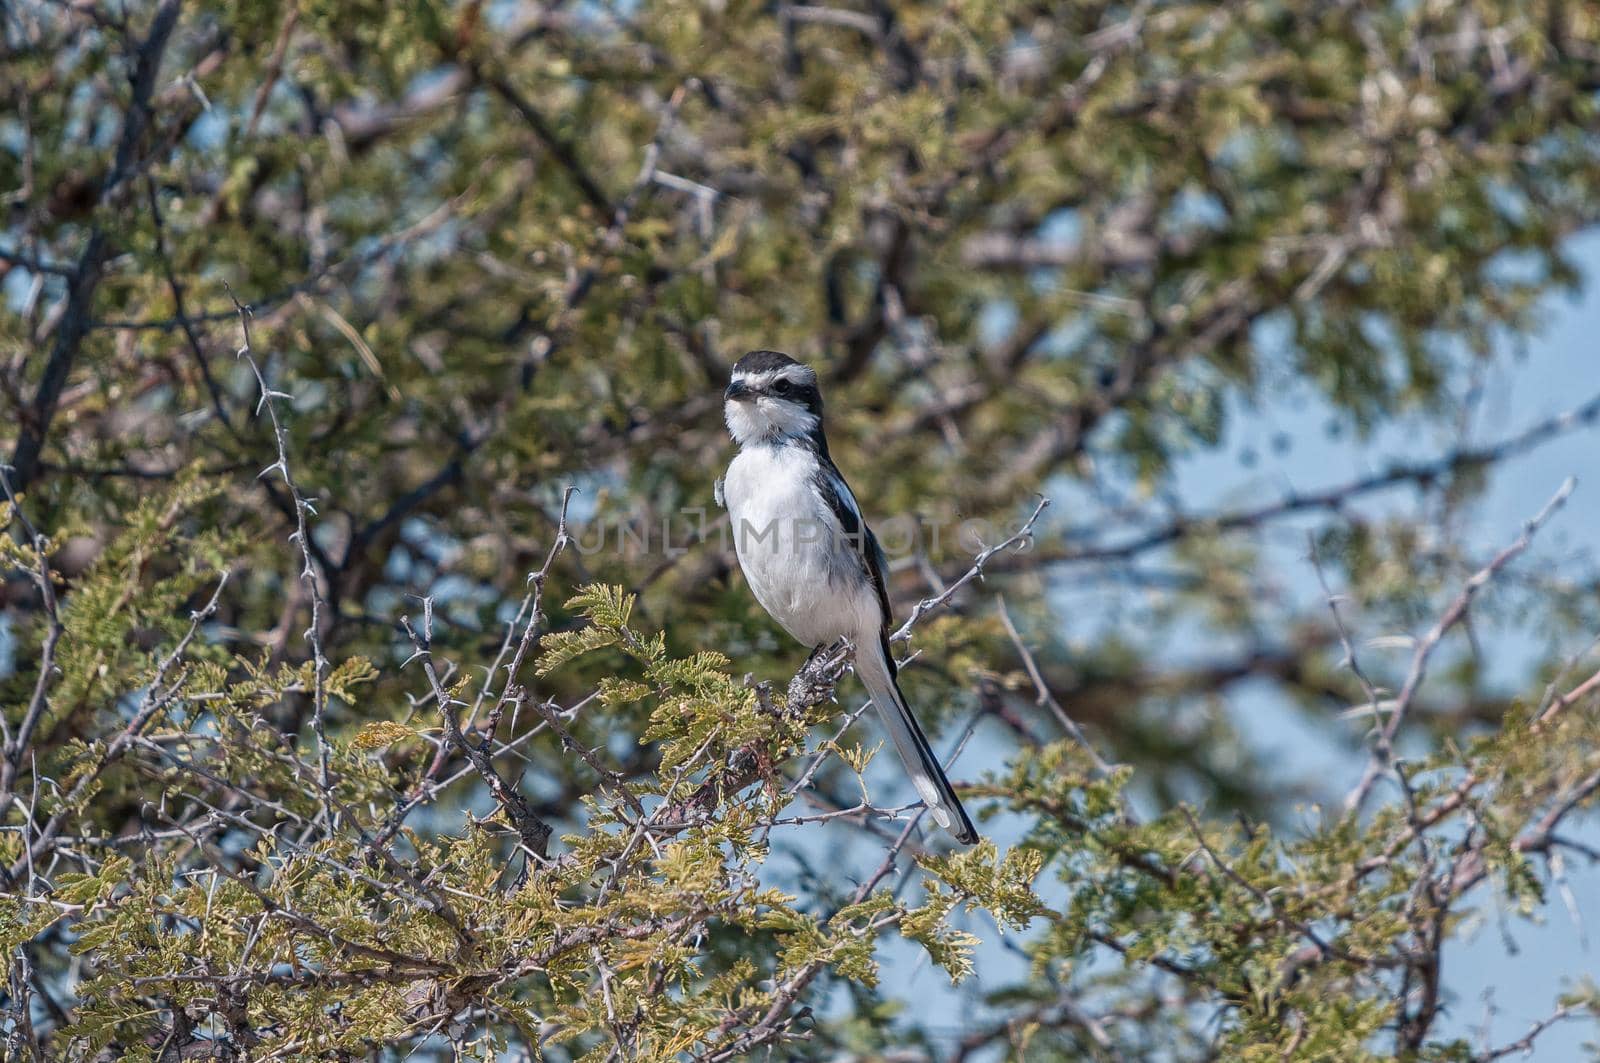 A Common Fiscal, Lanius collaris, in a tree in northern Namibia